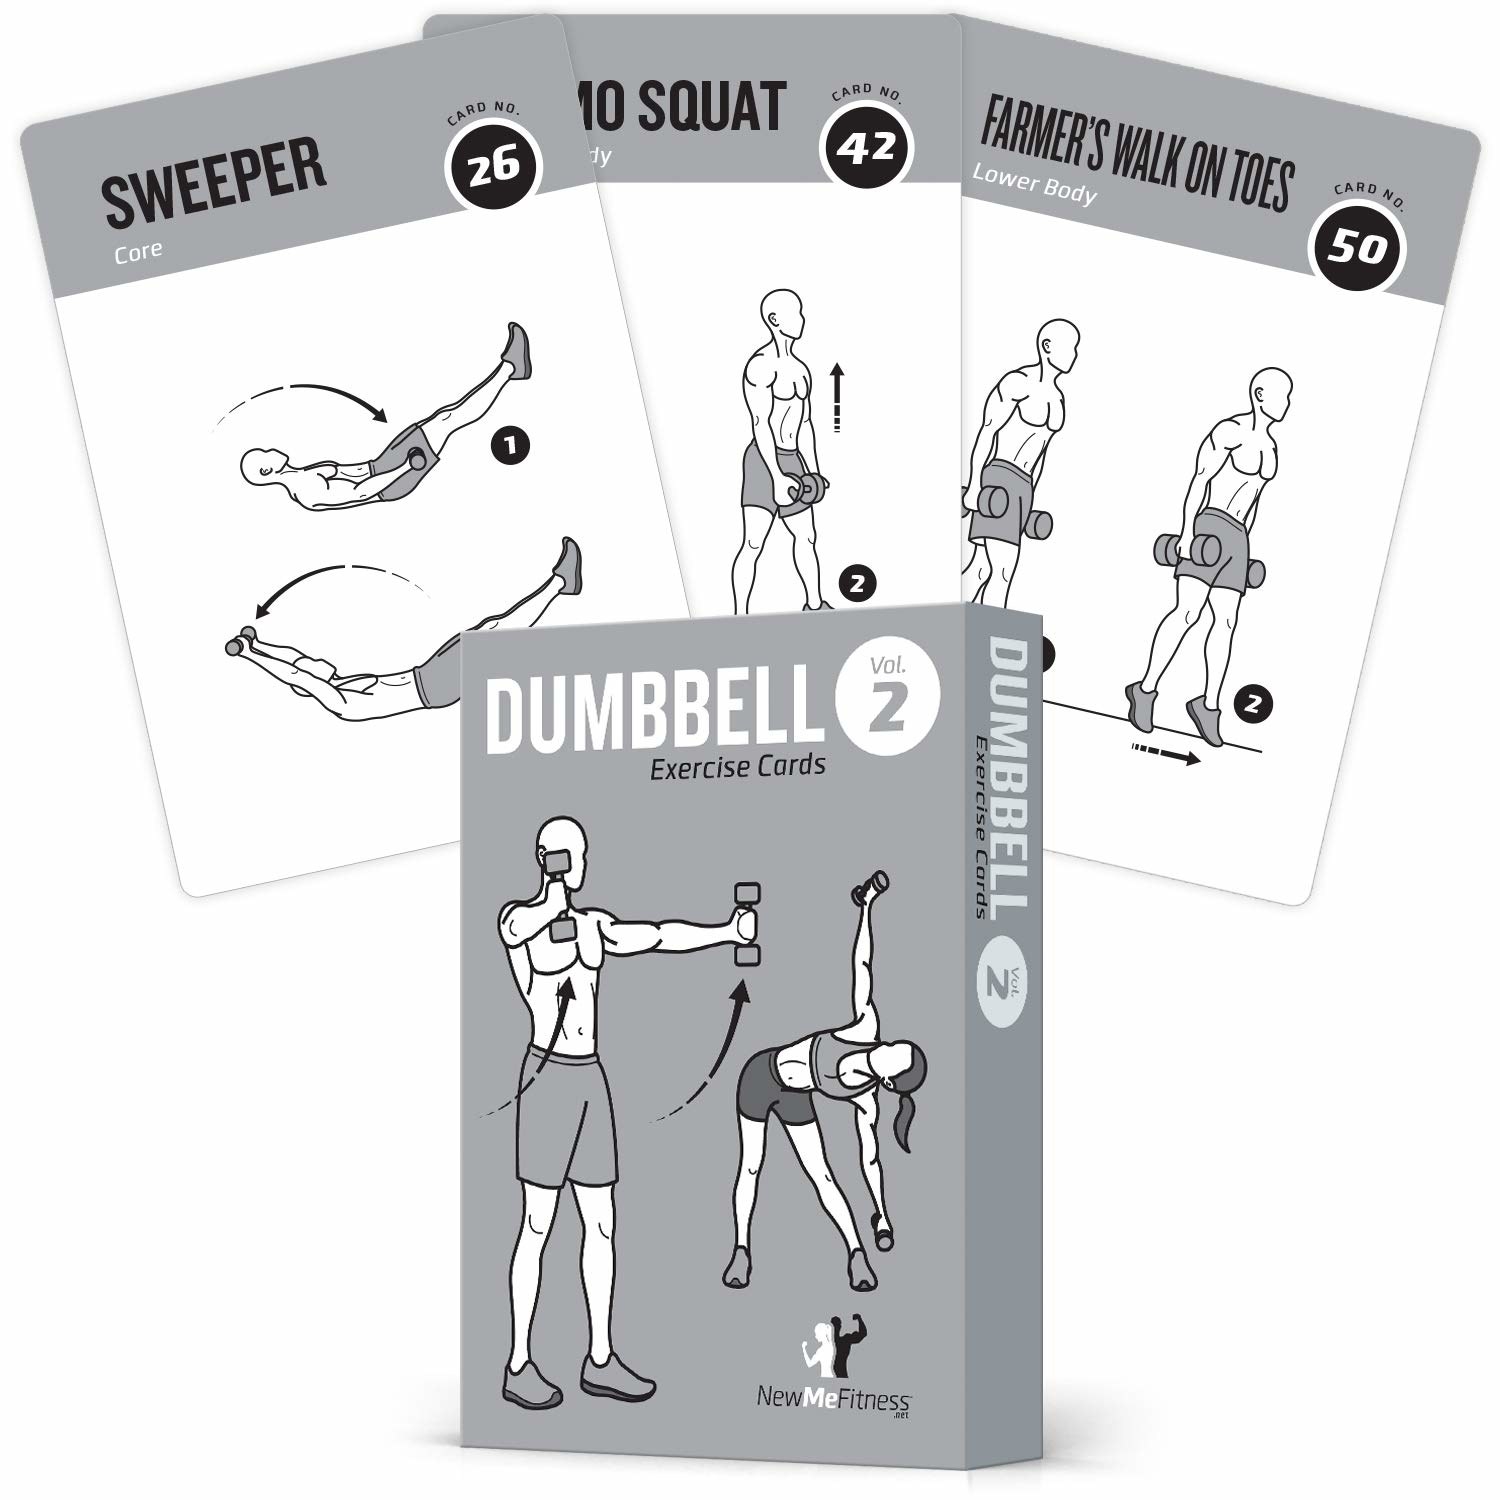 the exercise cards which come in a deck and have various illustrations of workouts on them